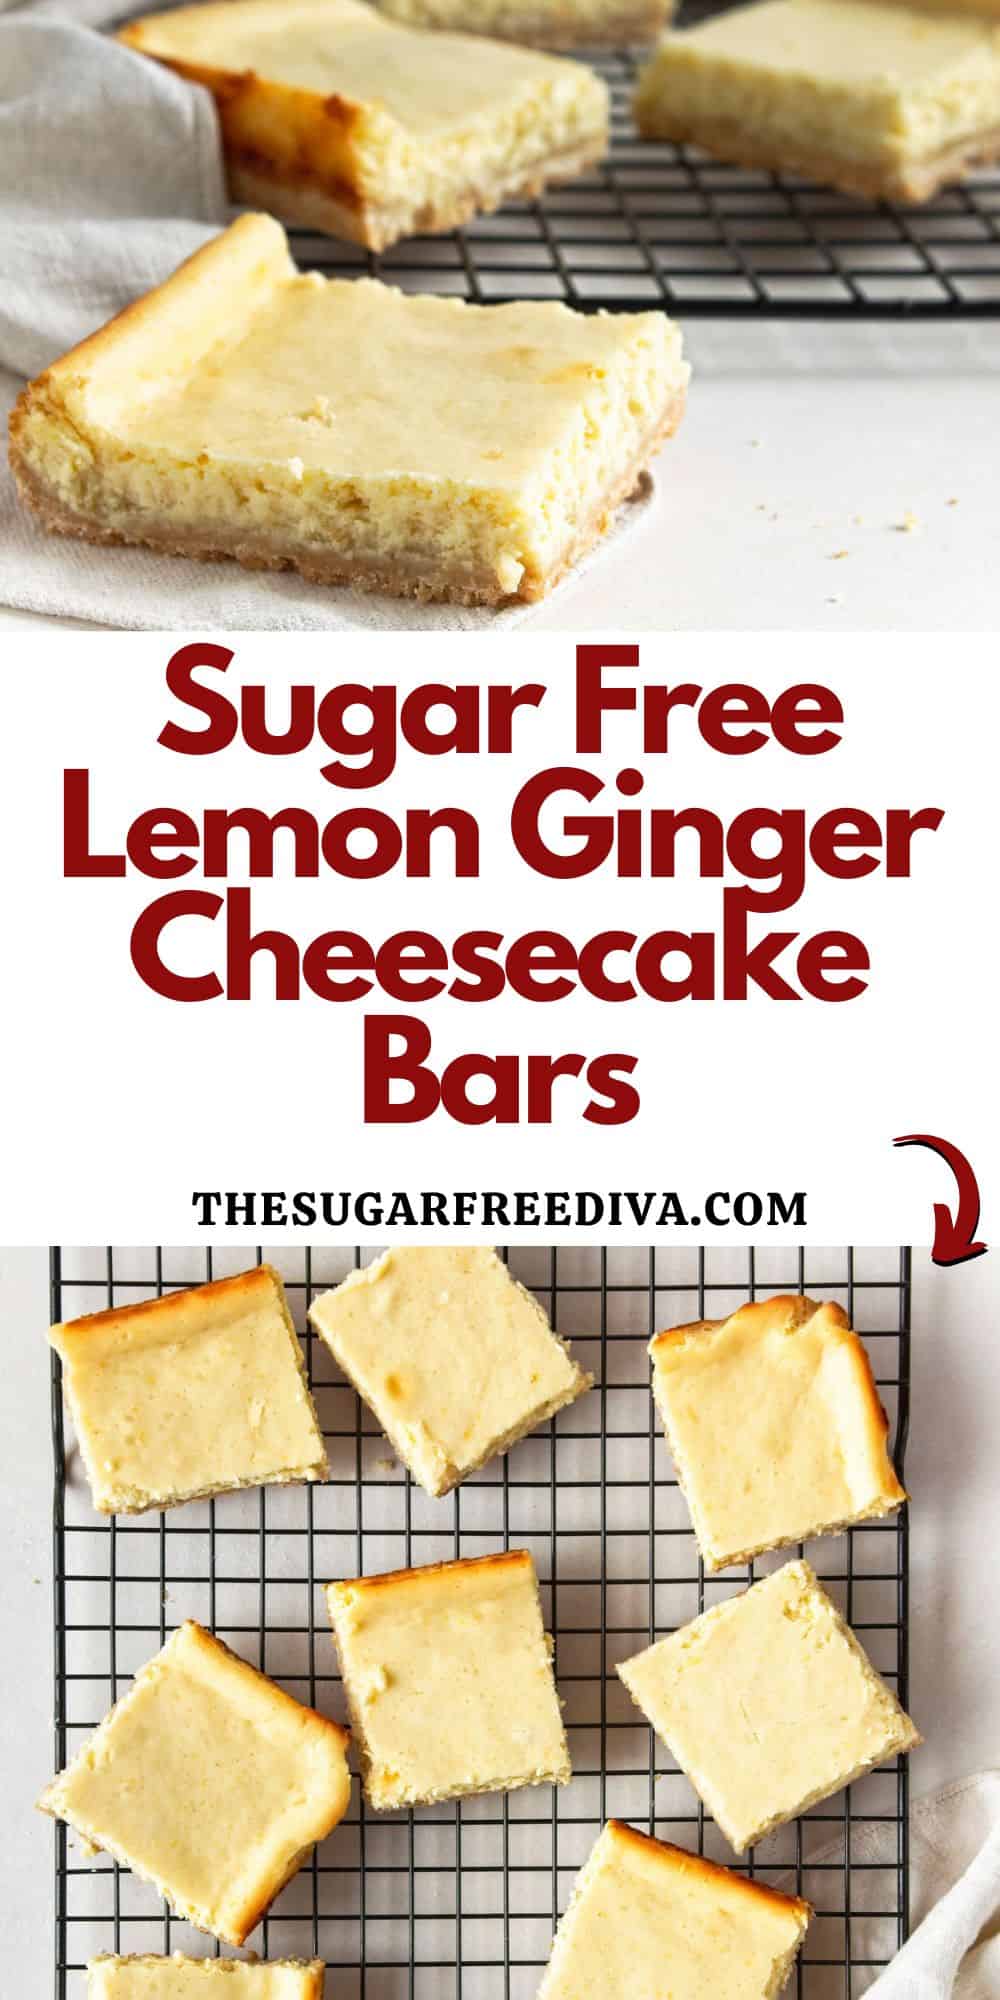 Sugar Free Lemon Ginger Cheesecake Bars, a delicious and simple baked dessert recipe made with almond flour crust. no added sugar, keto.